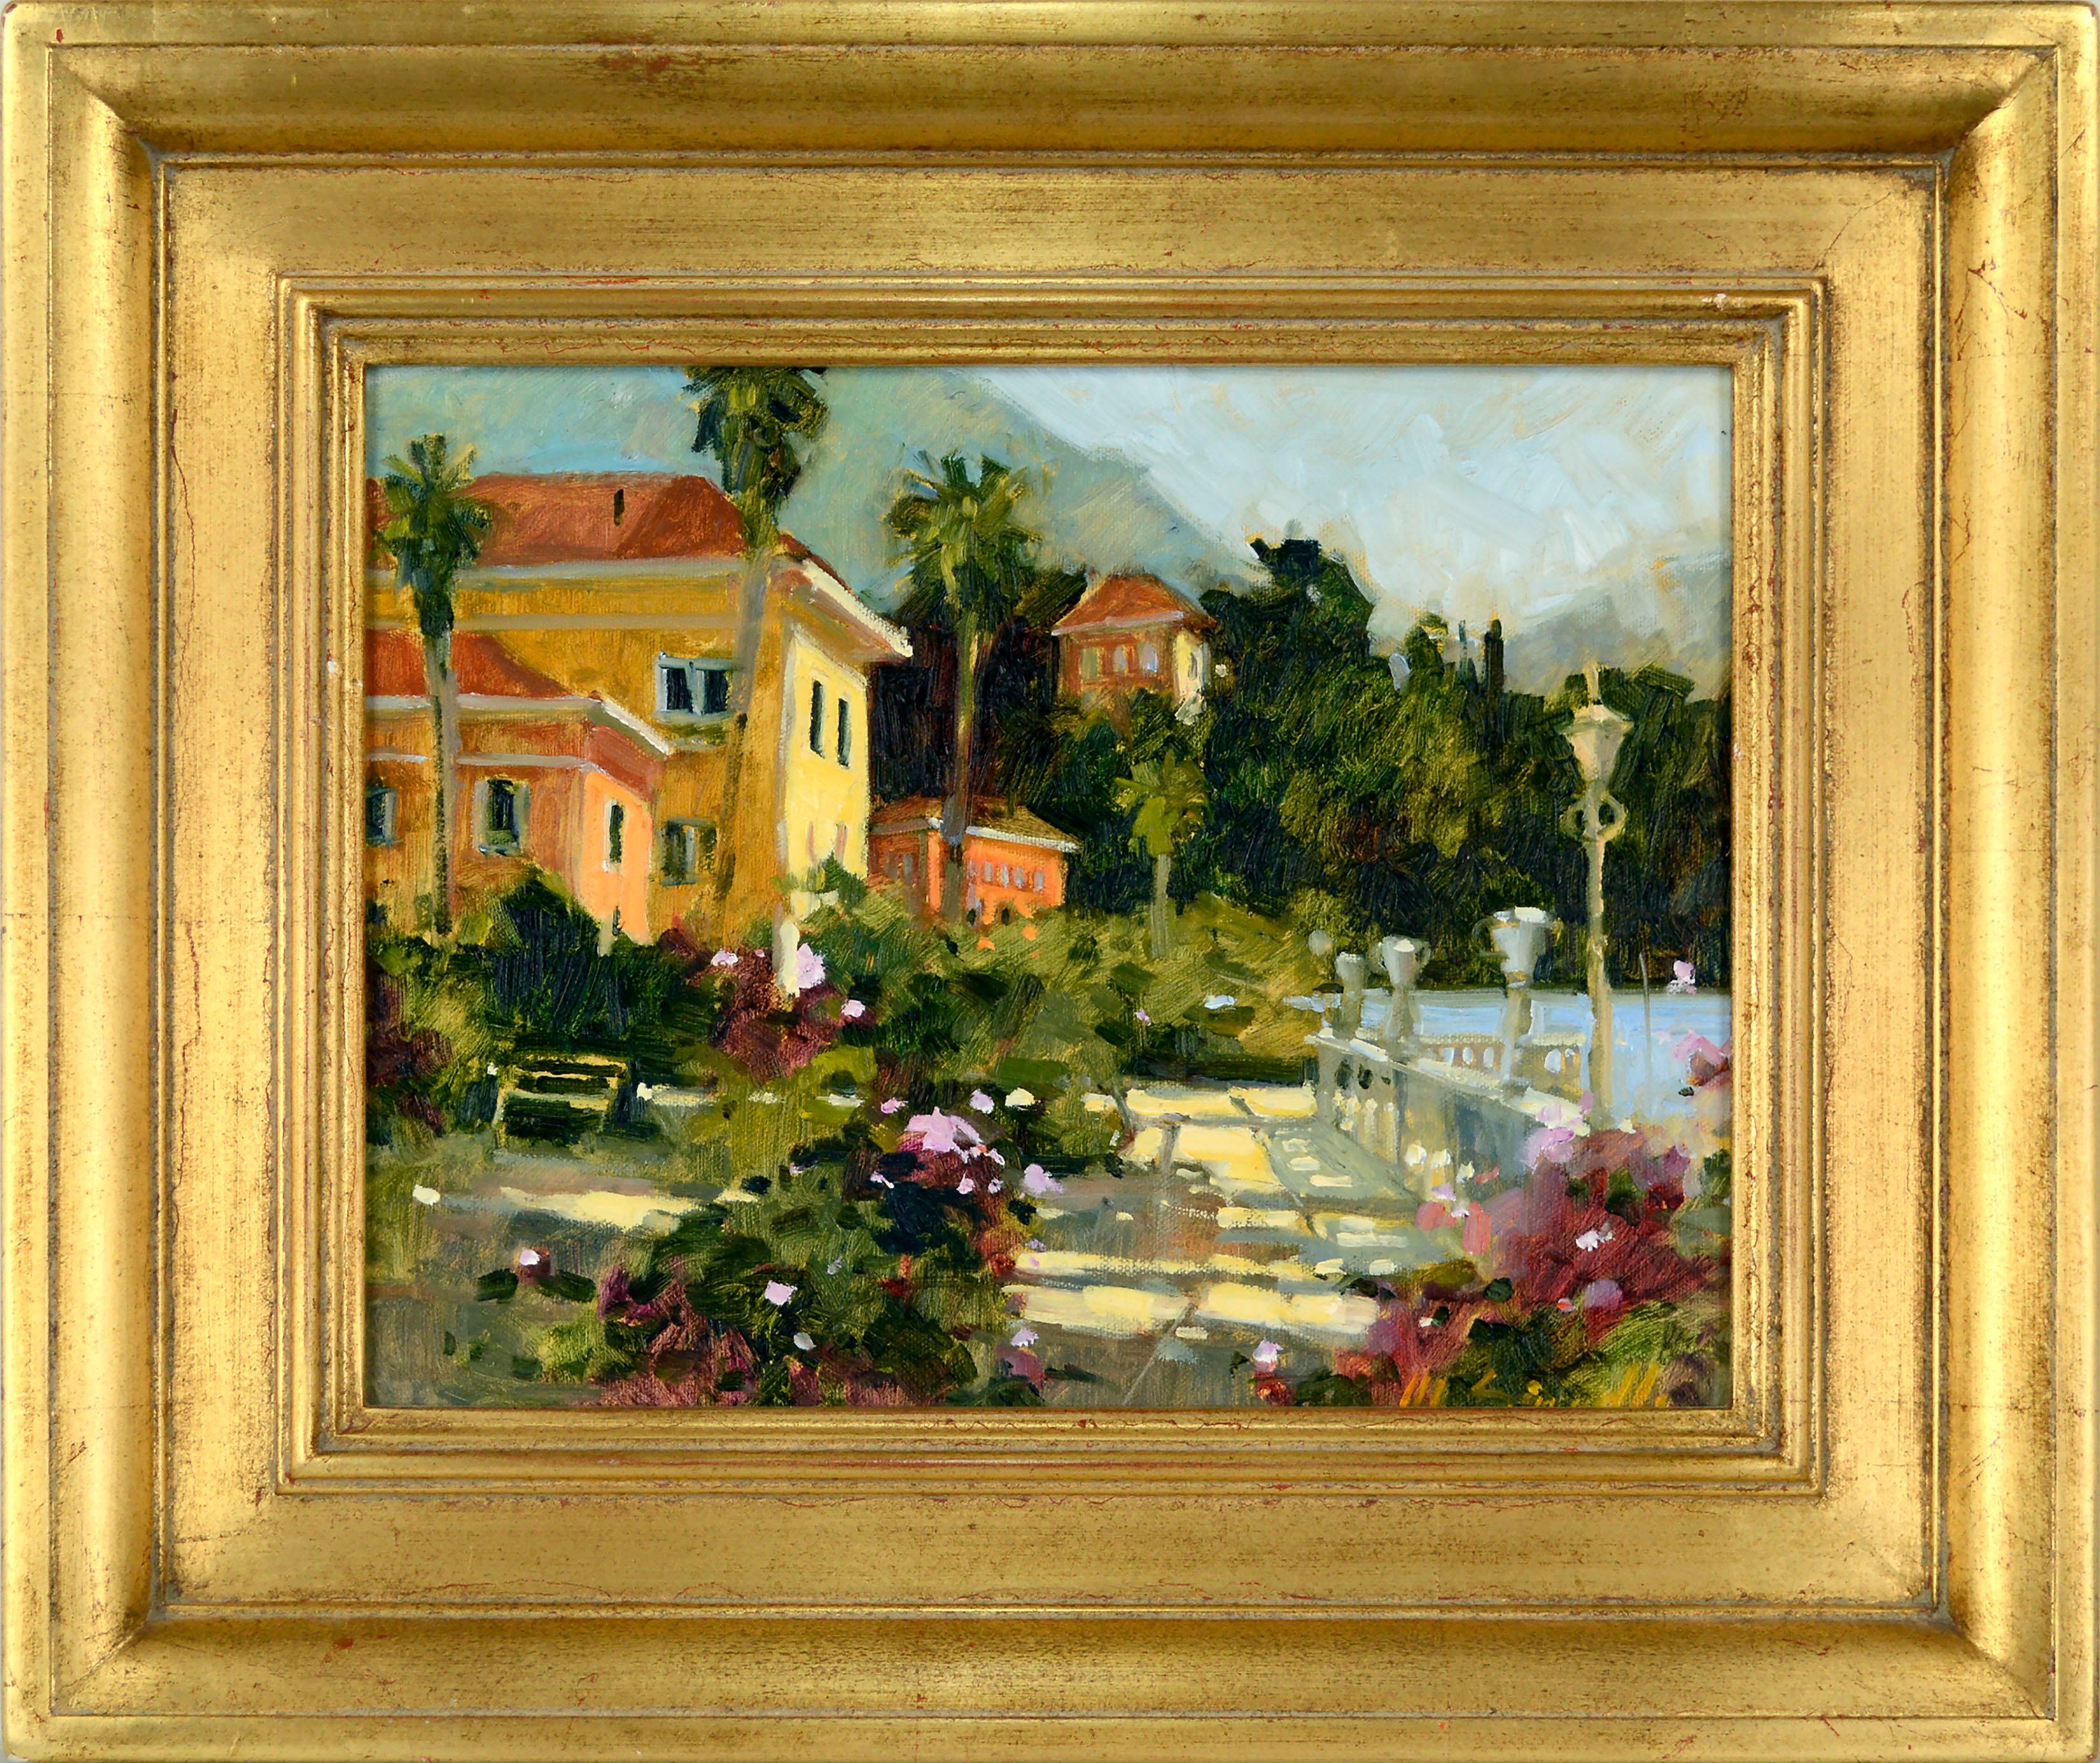 Marilyn Simandle Landscape Painting - "Grand Hotel, Bellagio" Lake Como, Italy Small-Scale Garden Landscape 